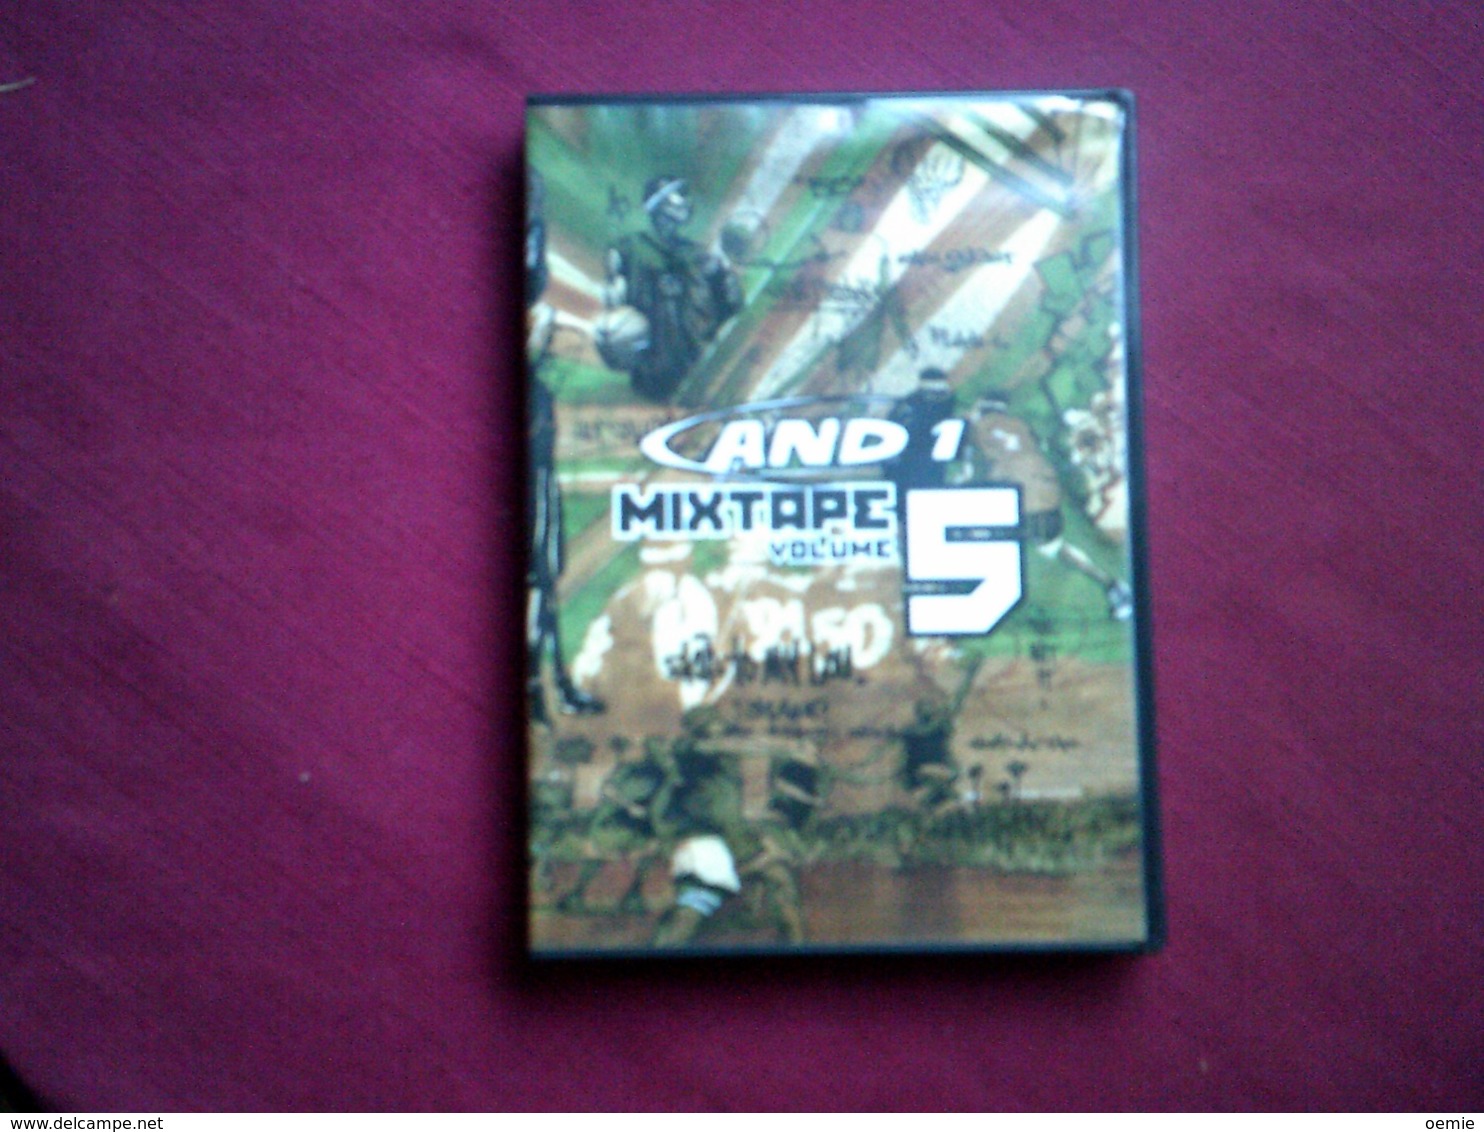 CAND 1 MIX TAPE VOLUME 5 - Sport